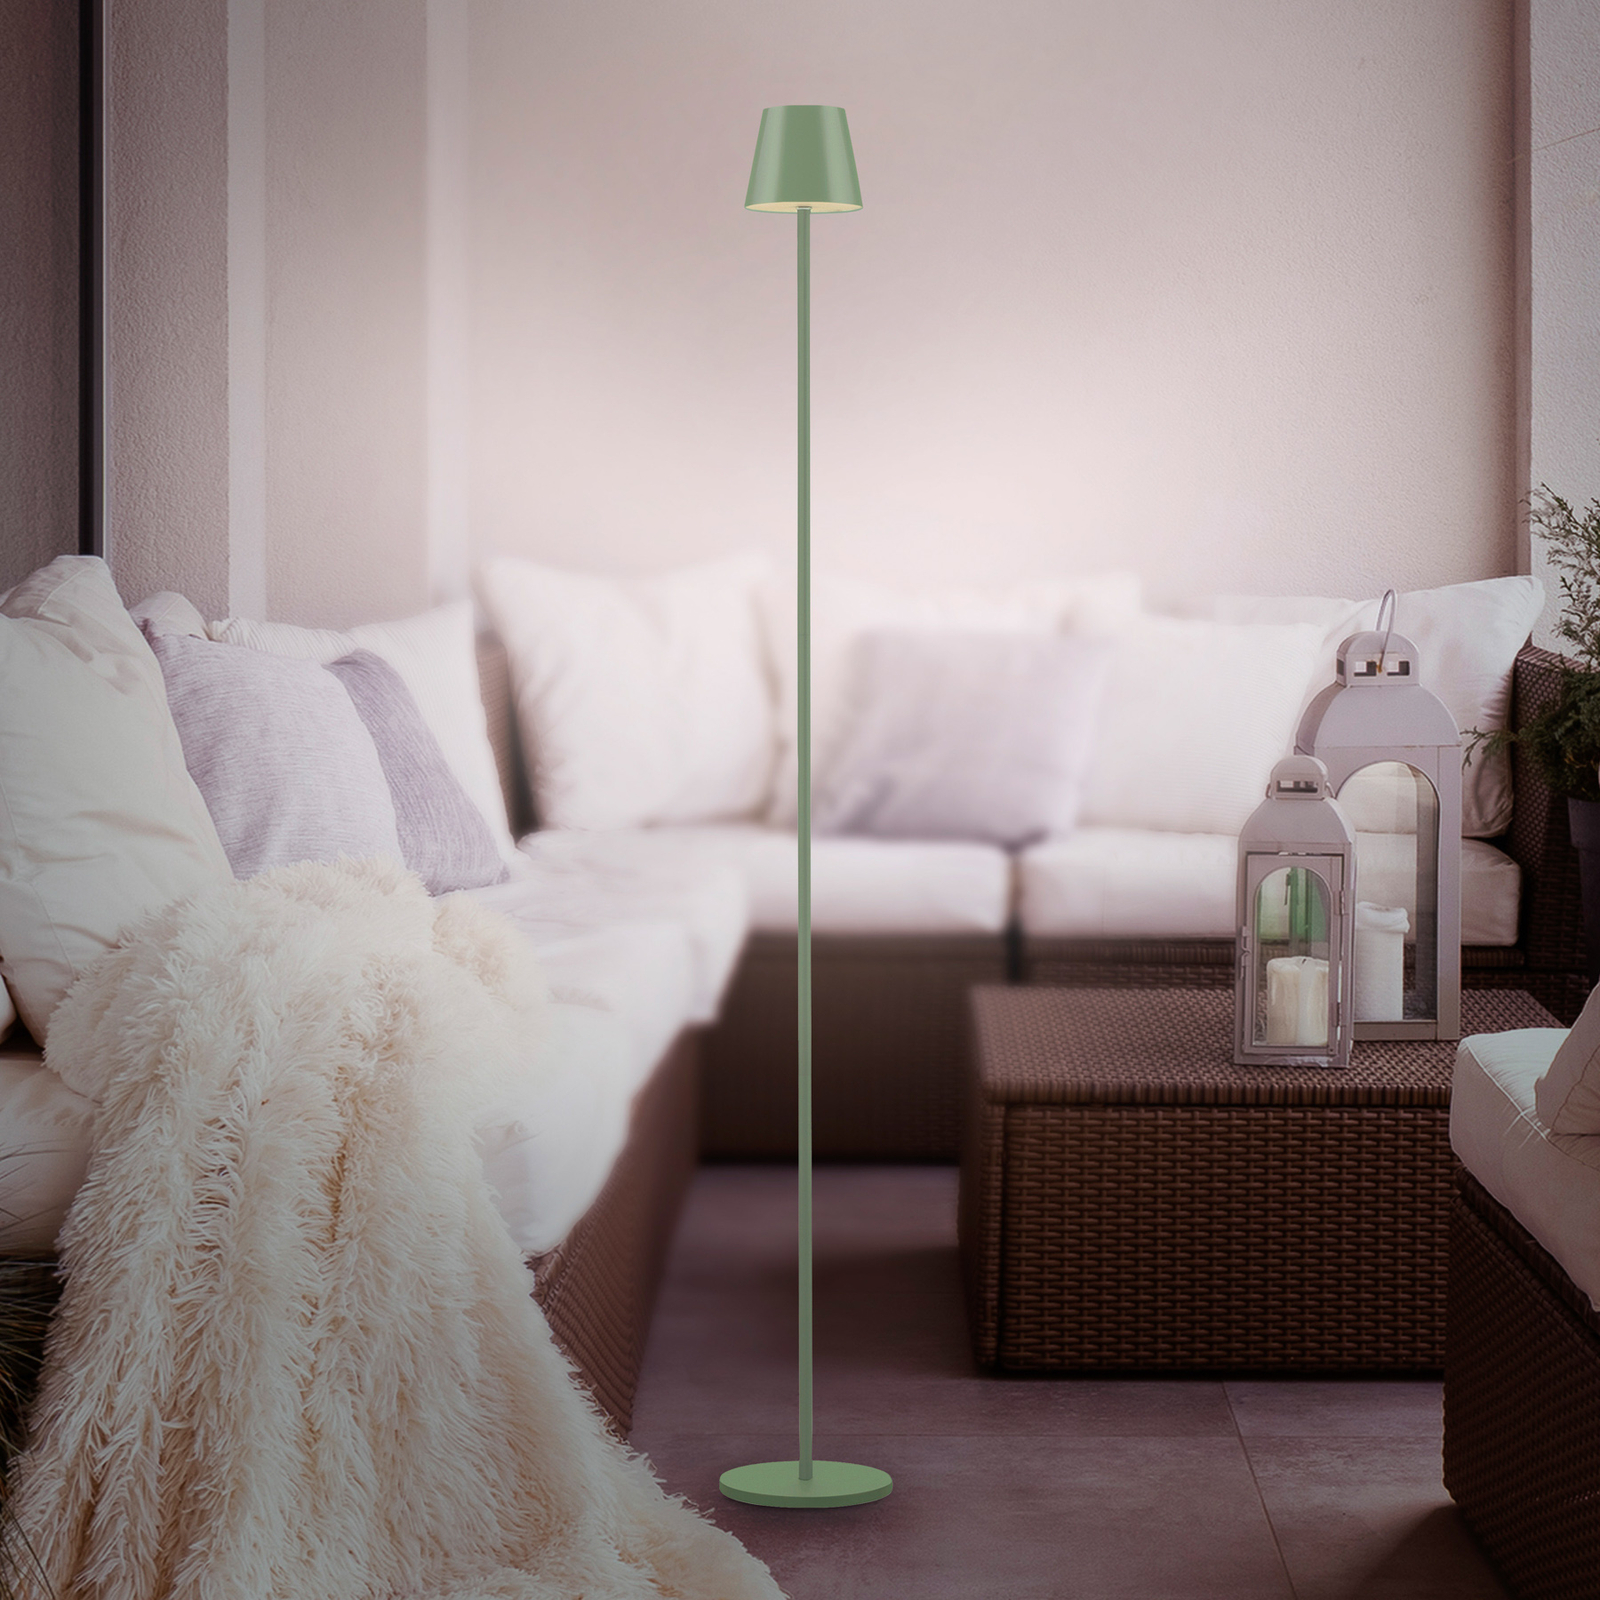 JUST LIGHT. Euria LED floor lamp with rechargeable battery, green, iron,